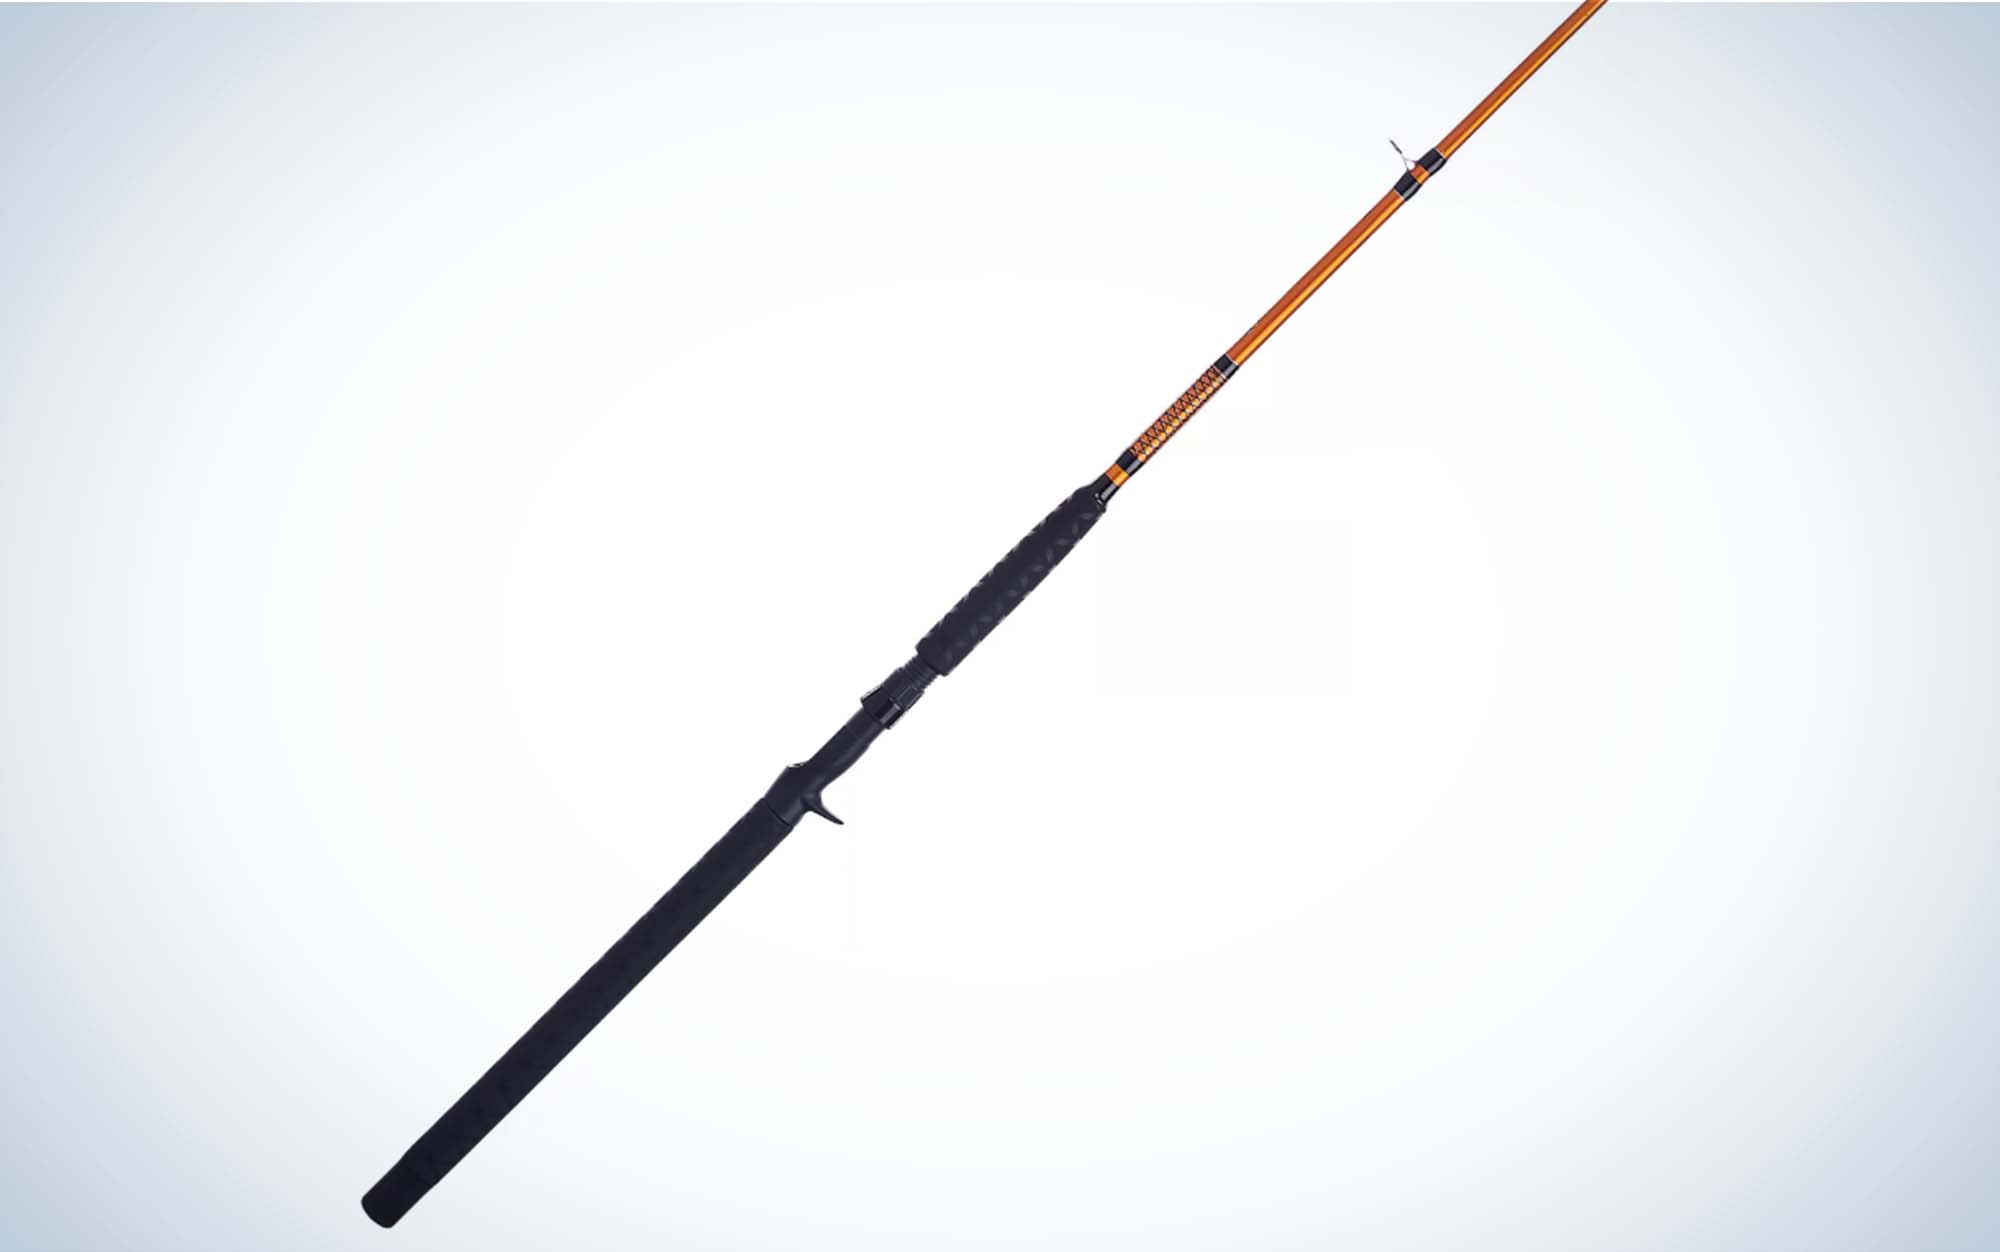 The Shakespeare Ugly Stik Catfish Special is the best value catfish rod.